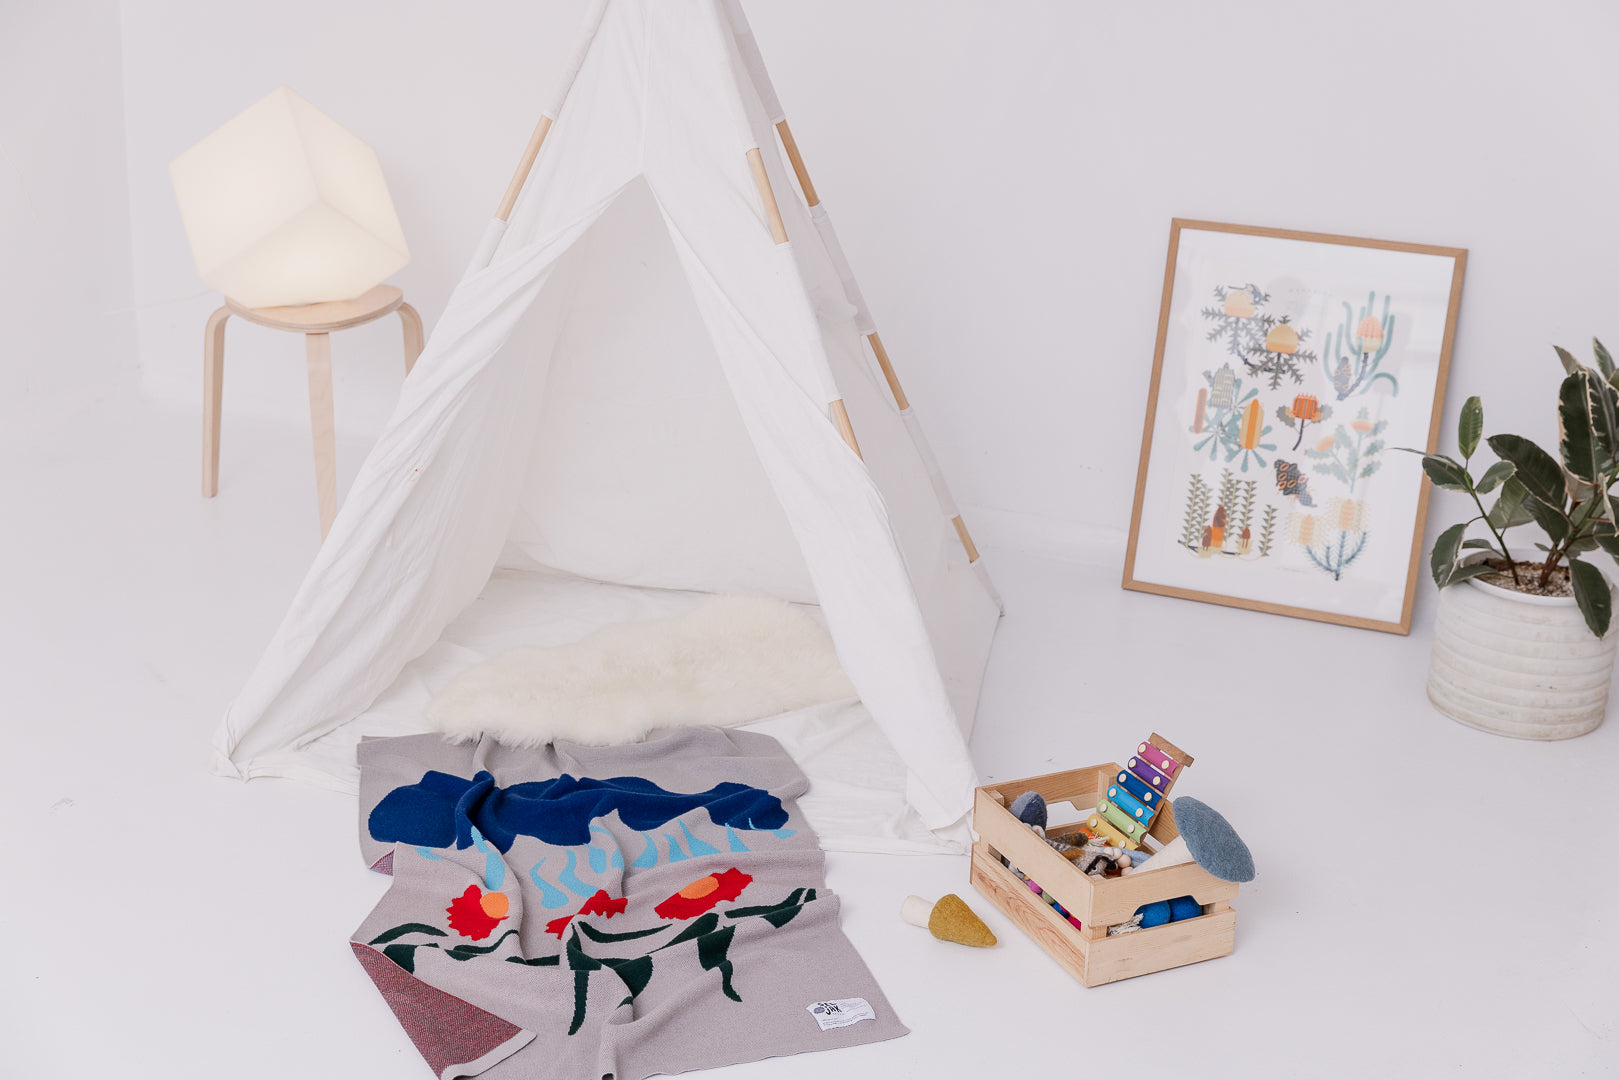 Dancing Daisies blanket under a kids tipi with some toys